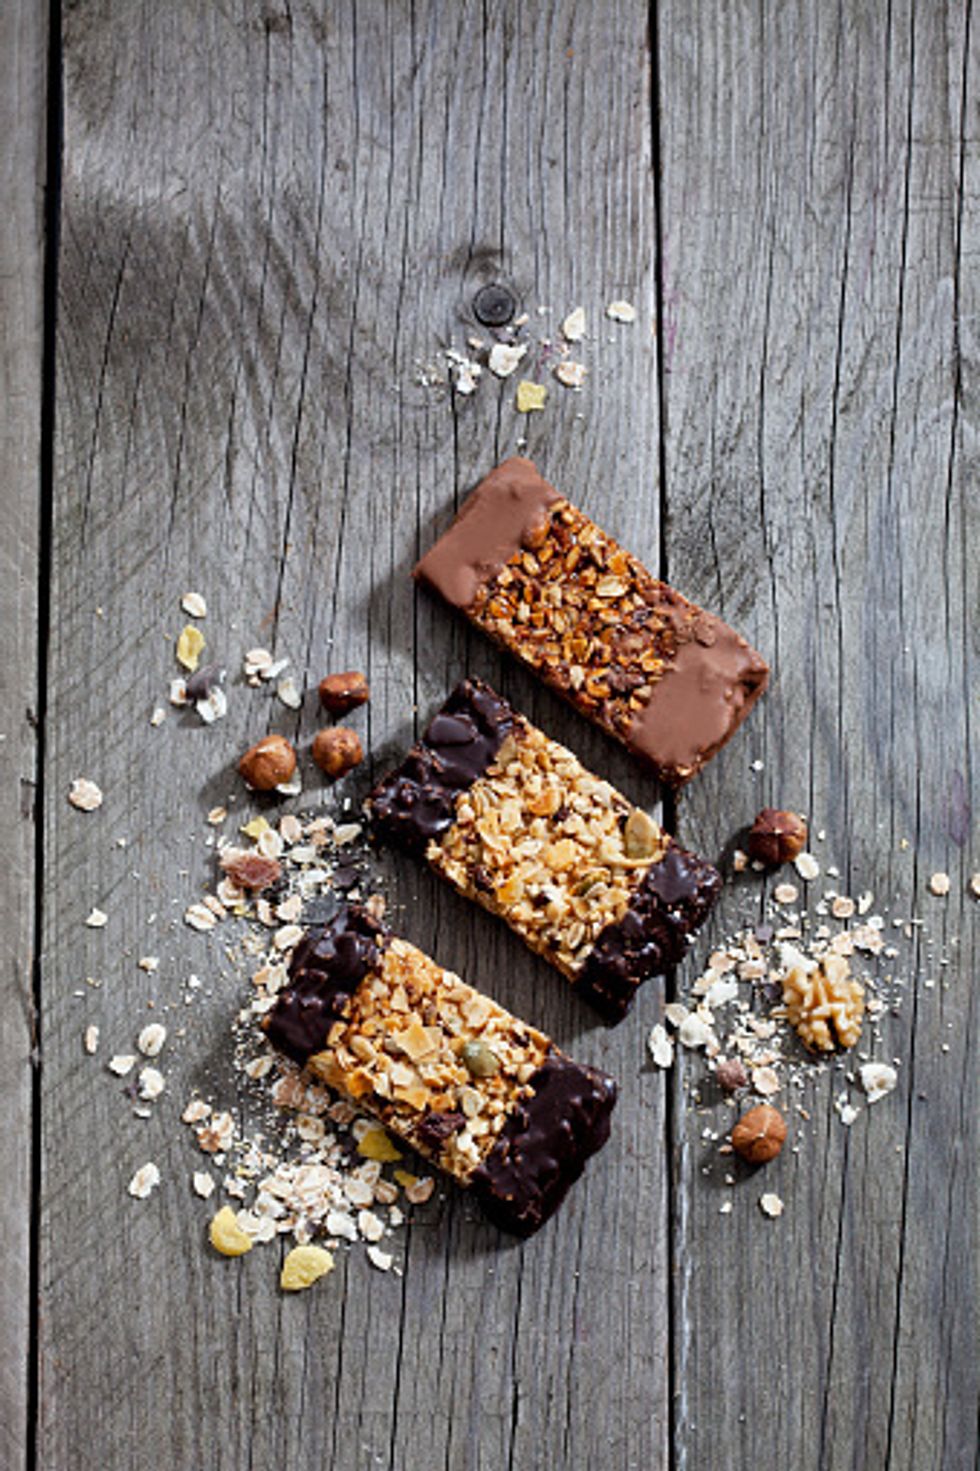 Your new favorite energy bar...